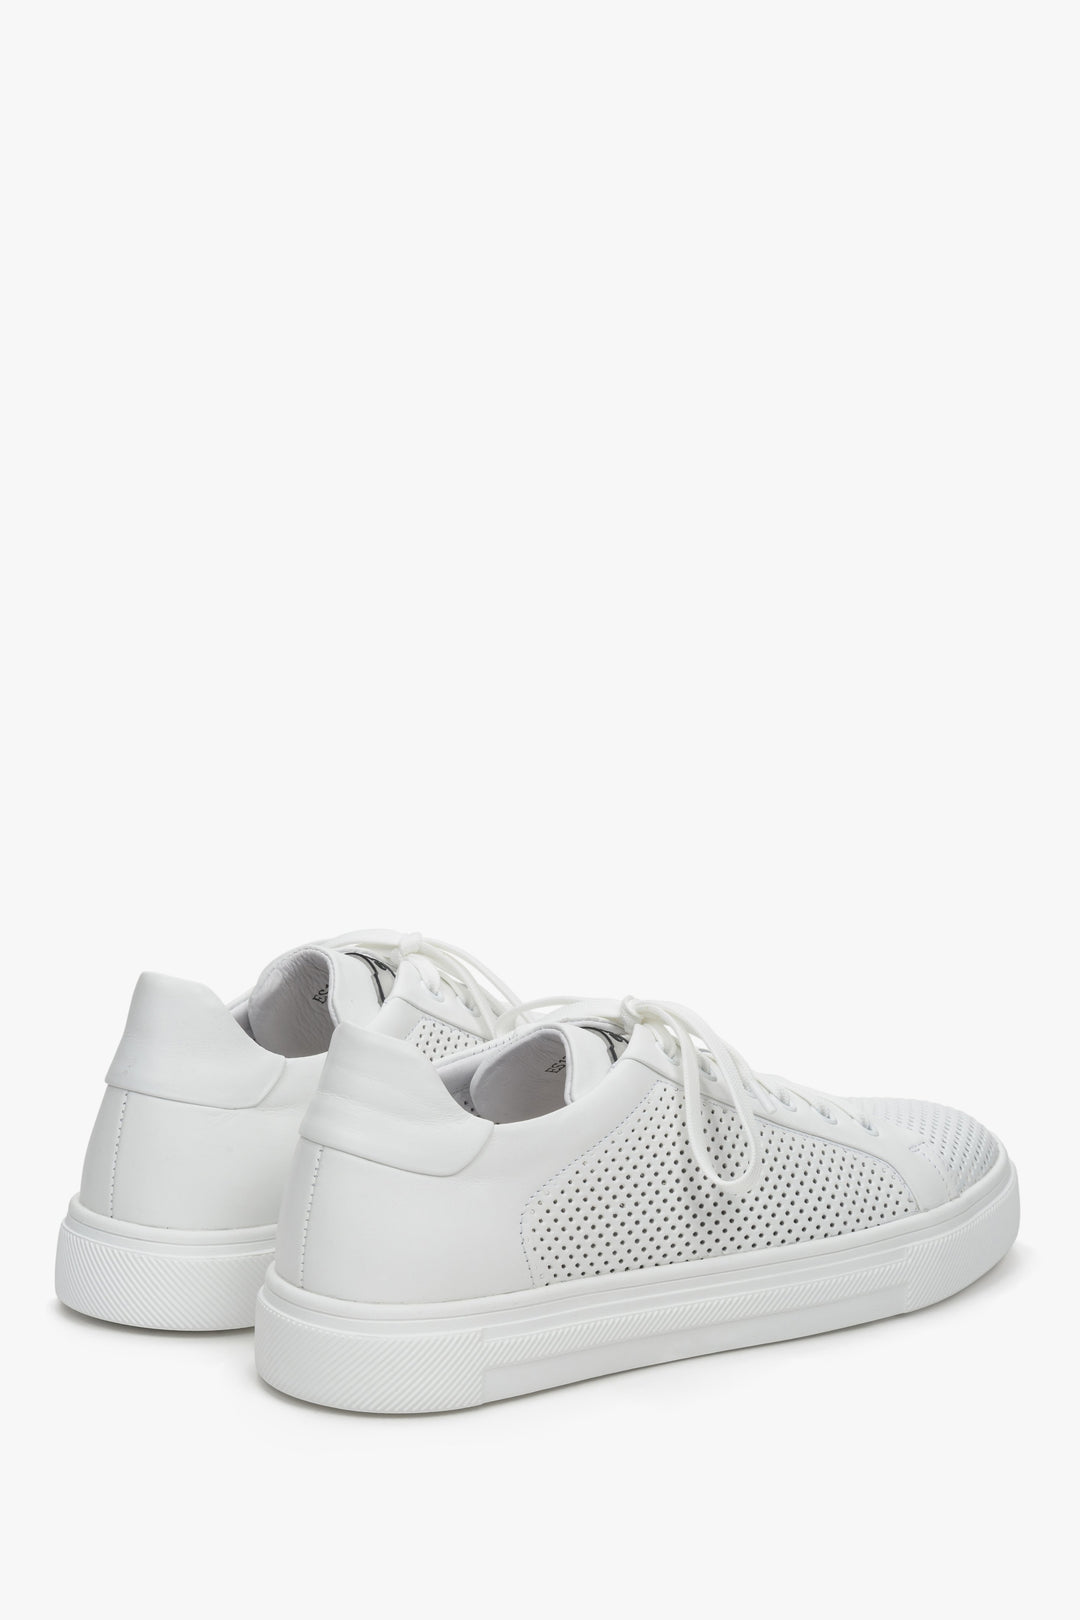 Men's white leather summer sneakers with perforation - close-up on the heel counter and the side line of the shoe.